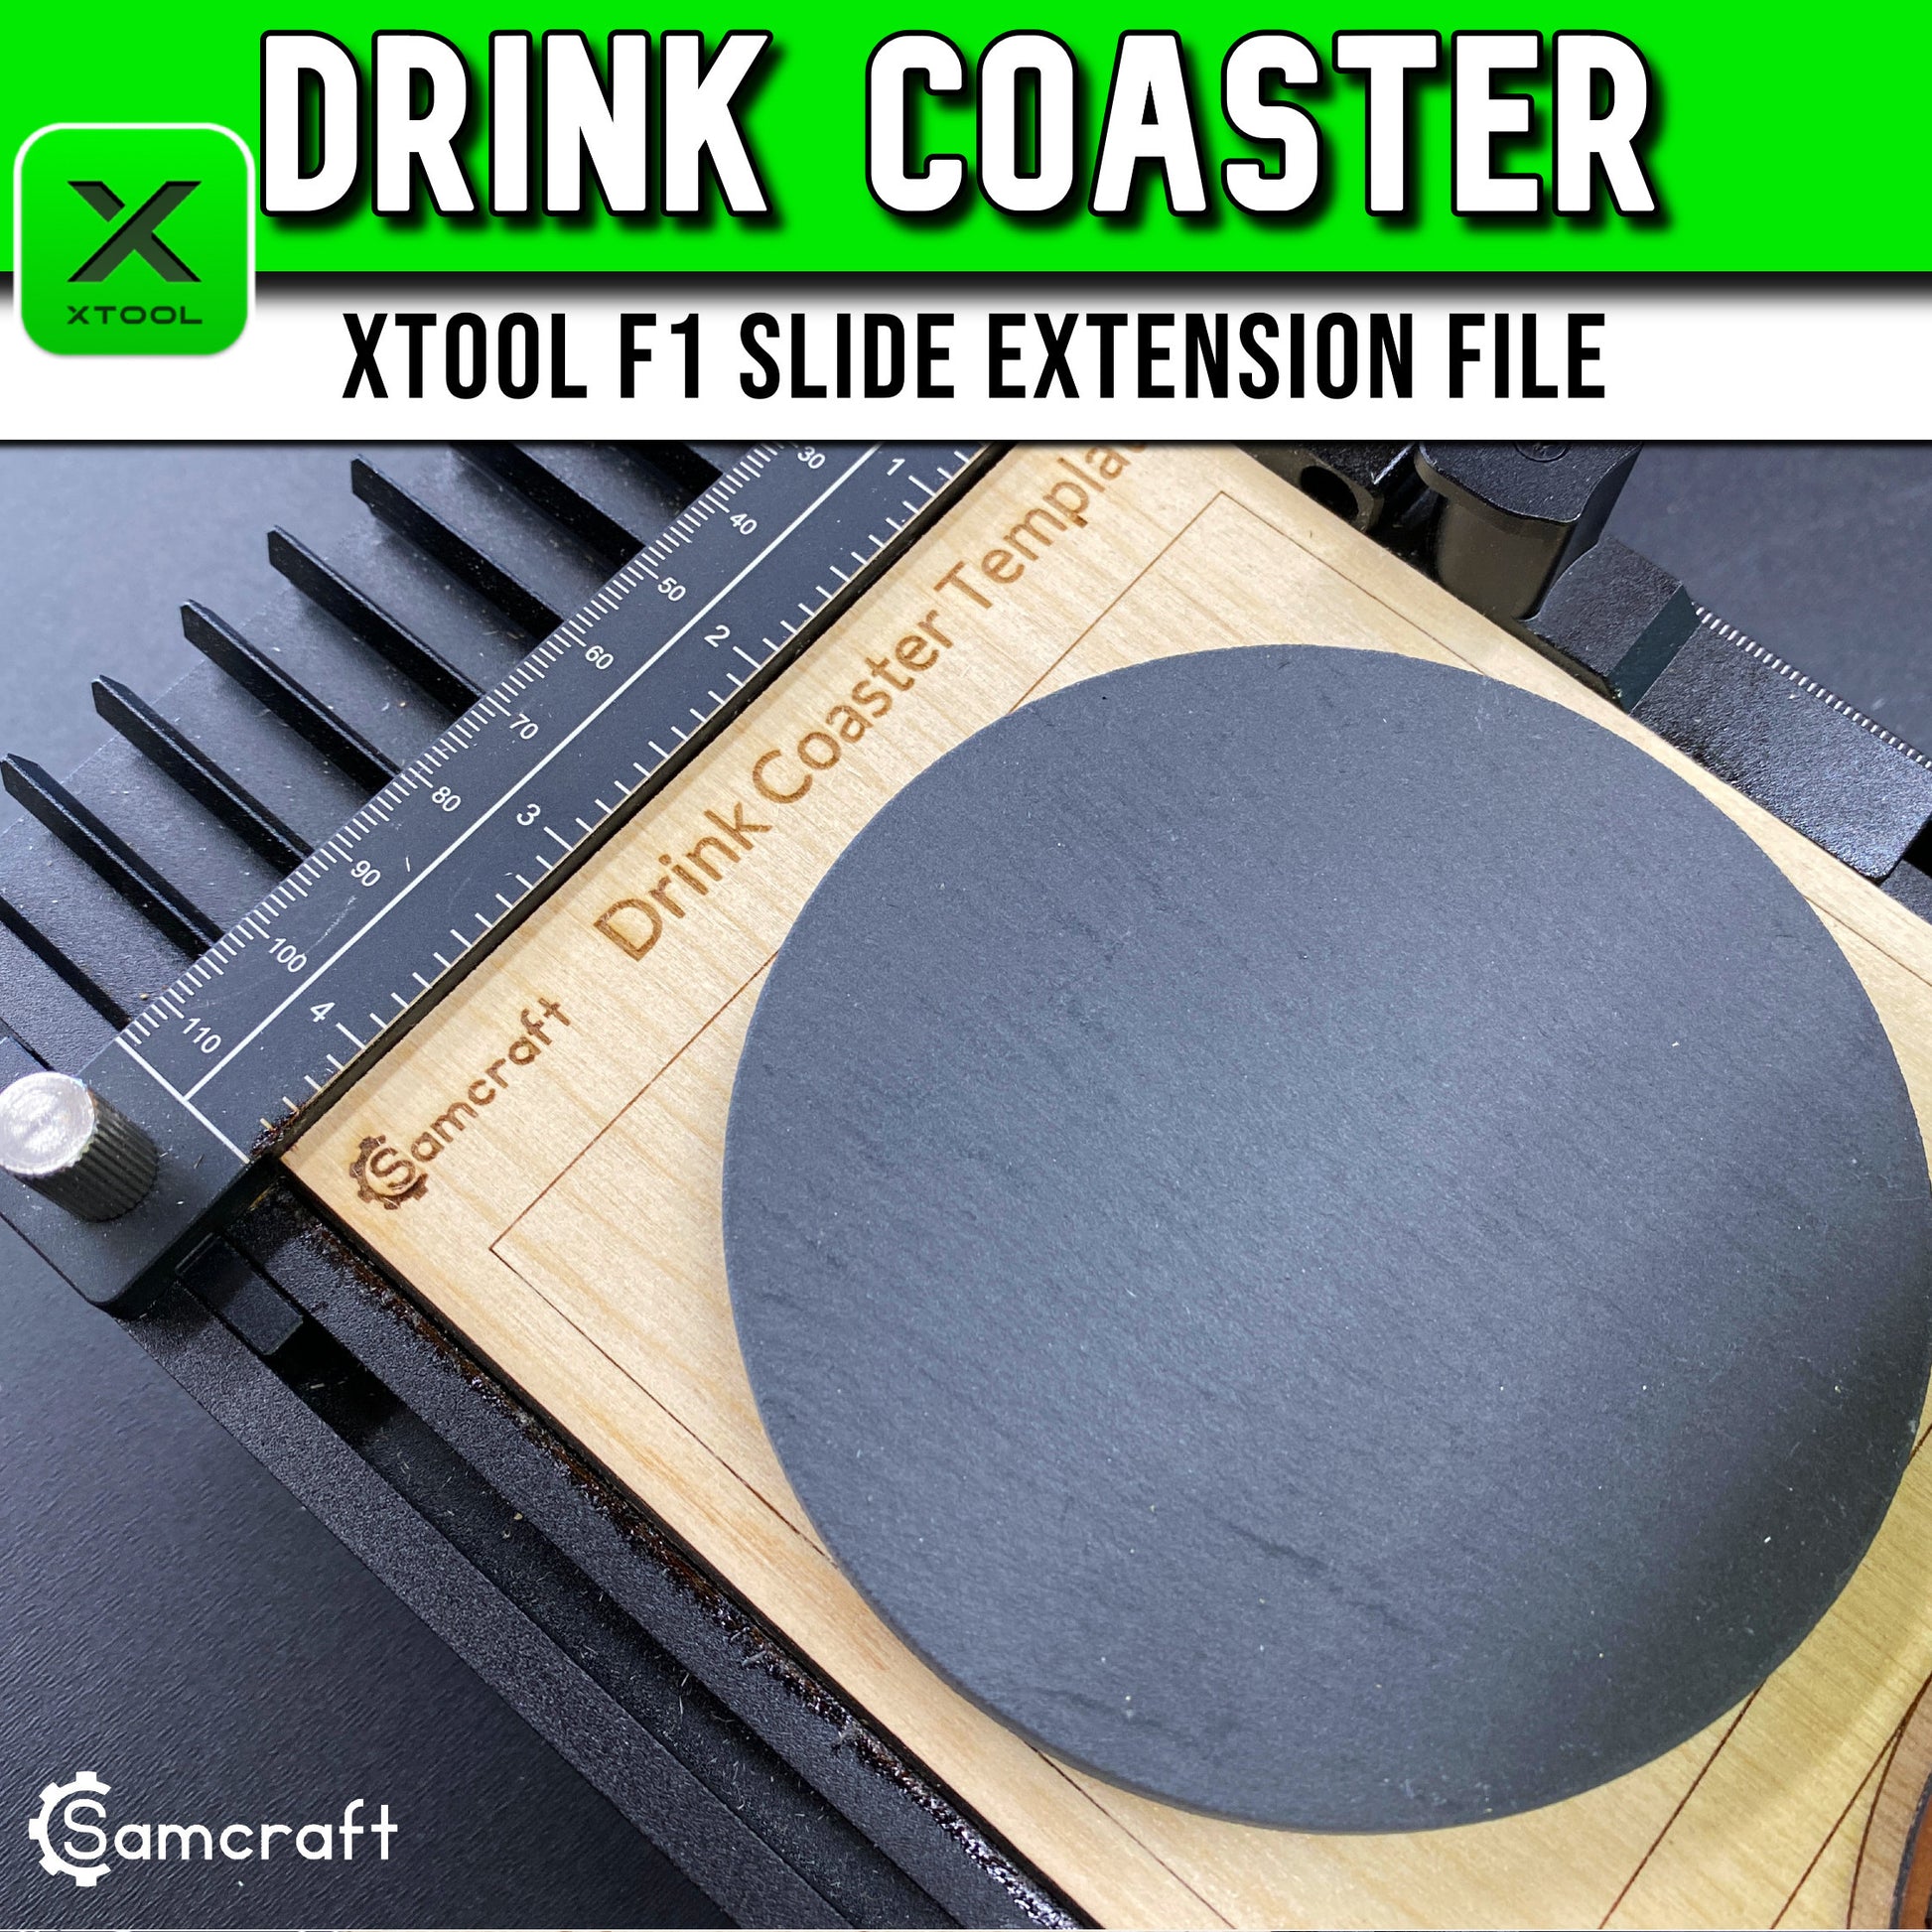 Xtool F1 Template, Xtool F1 Slide Extension, Xtool Drink Coaster File,  Drink Coaster Template, XCS File, Laser Engraving File, Samcraft 